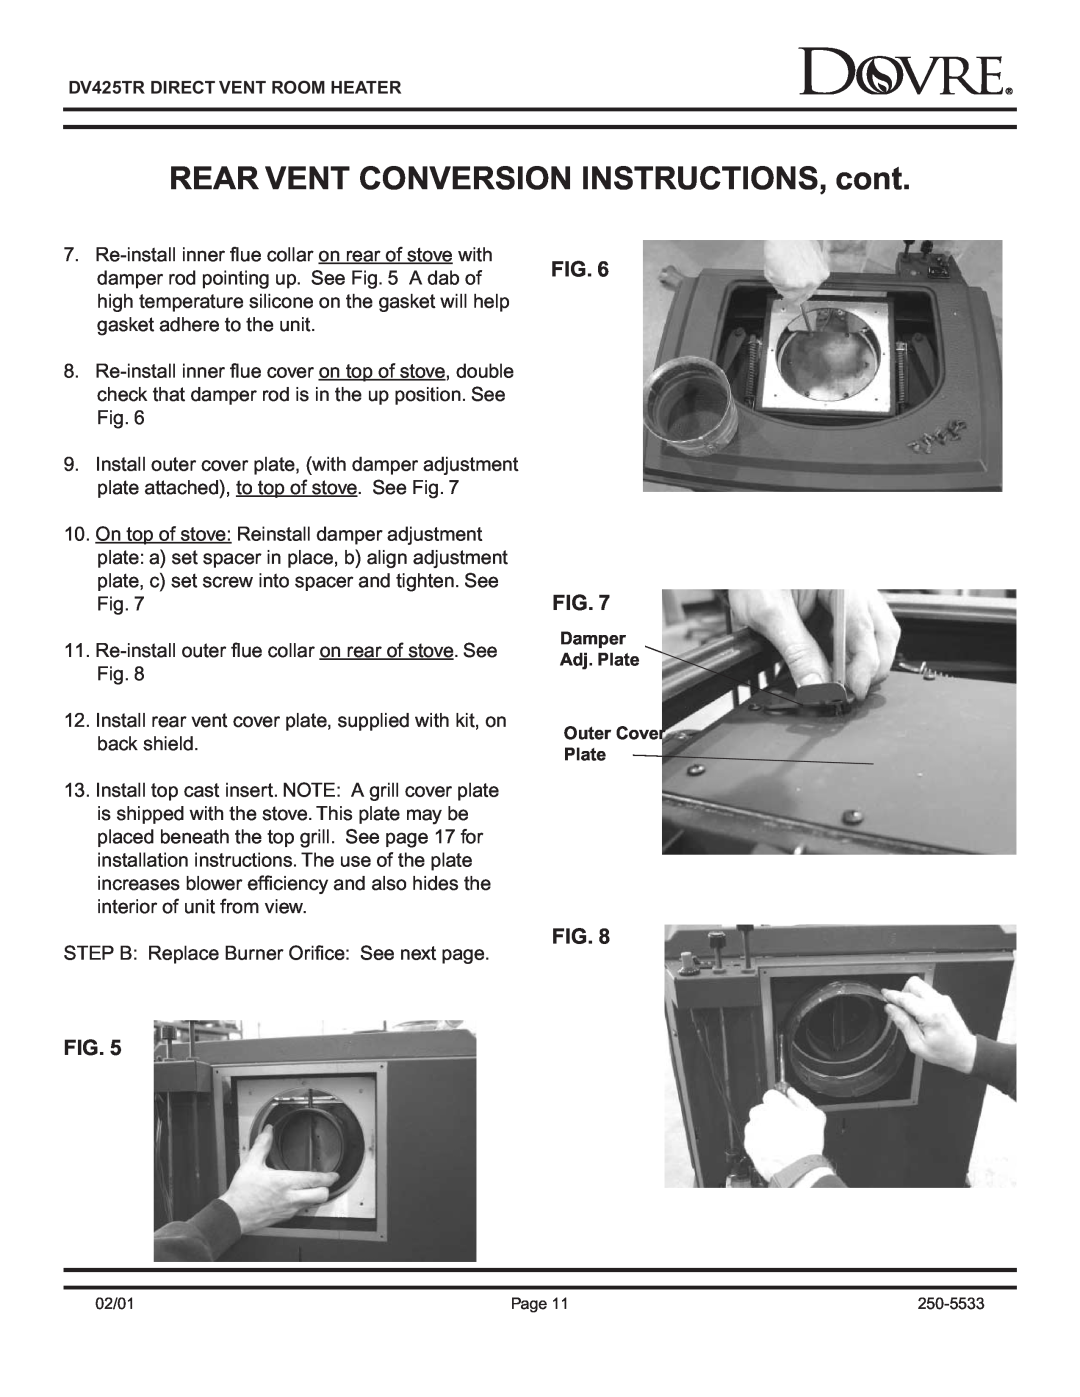 Sapphire Audio DV425TR owner manual REAR VENT CONVERSION INSTRUCTIONS, cont, Fig. Fig 